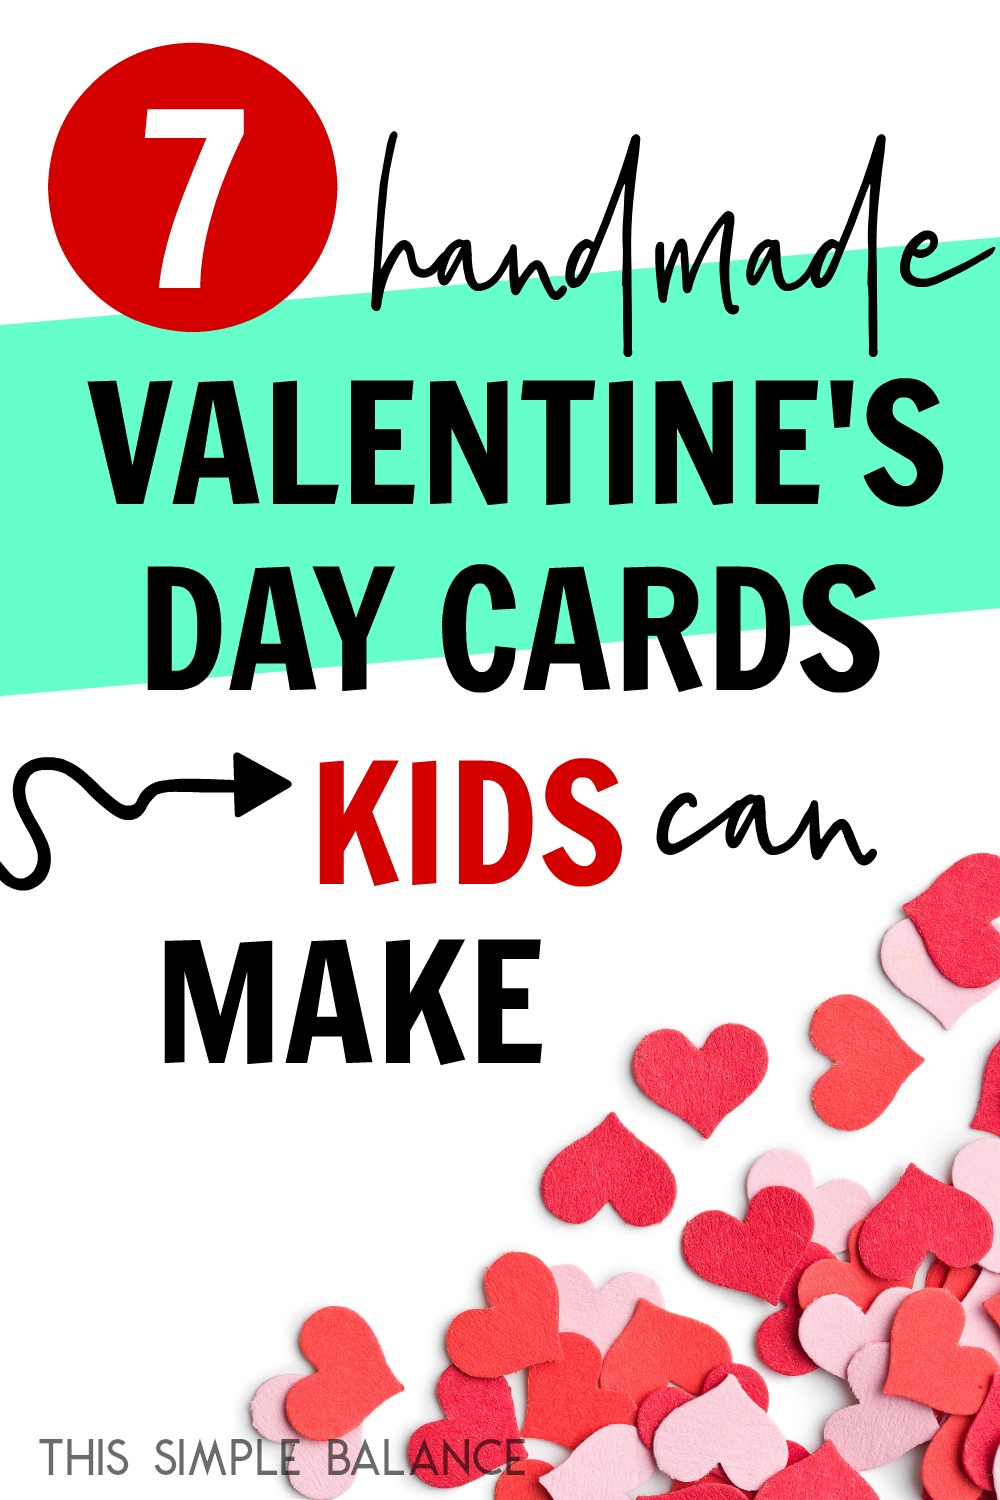 tiny felt red and pink hearts spread on white background, with text, "7 handmade valentine's day cards kids can make"